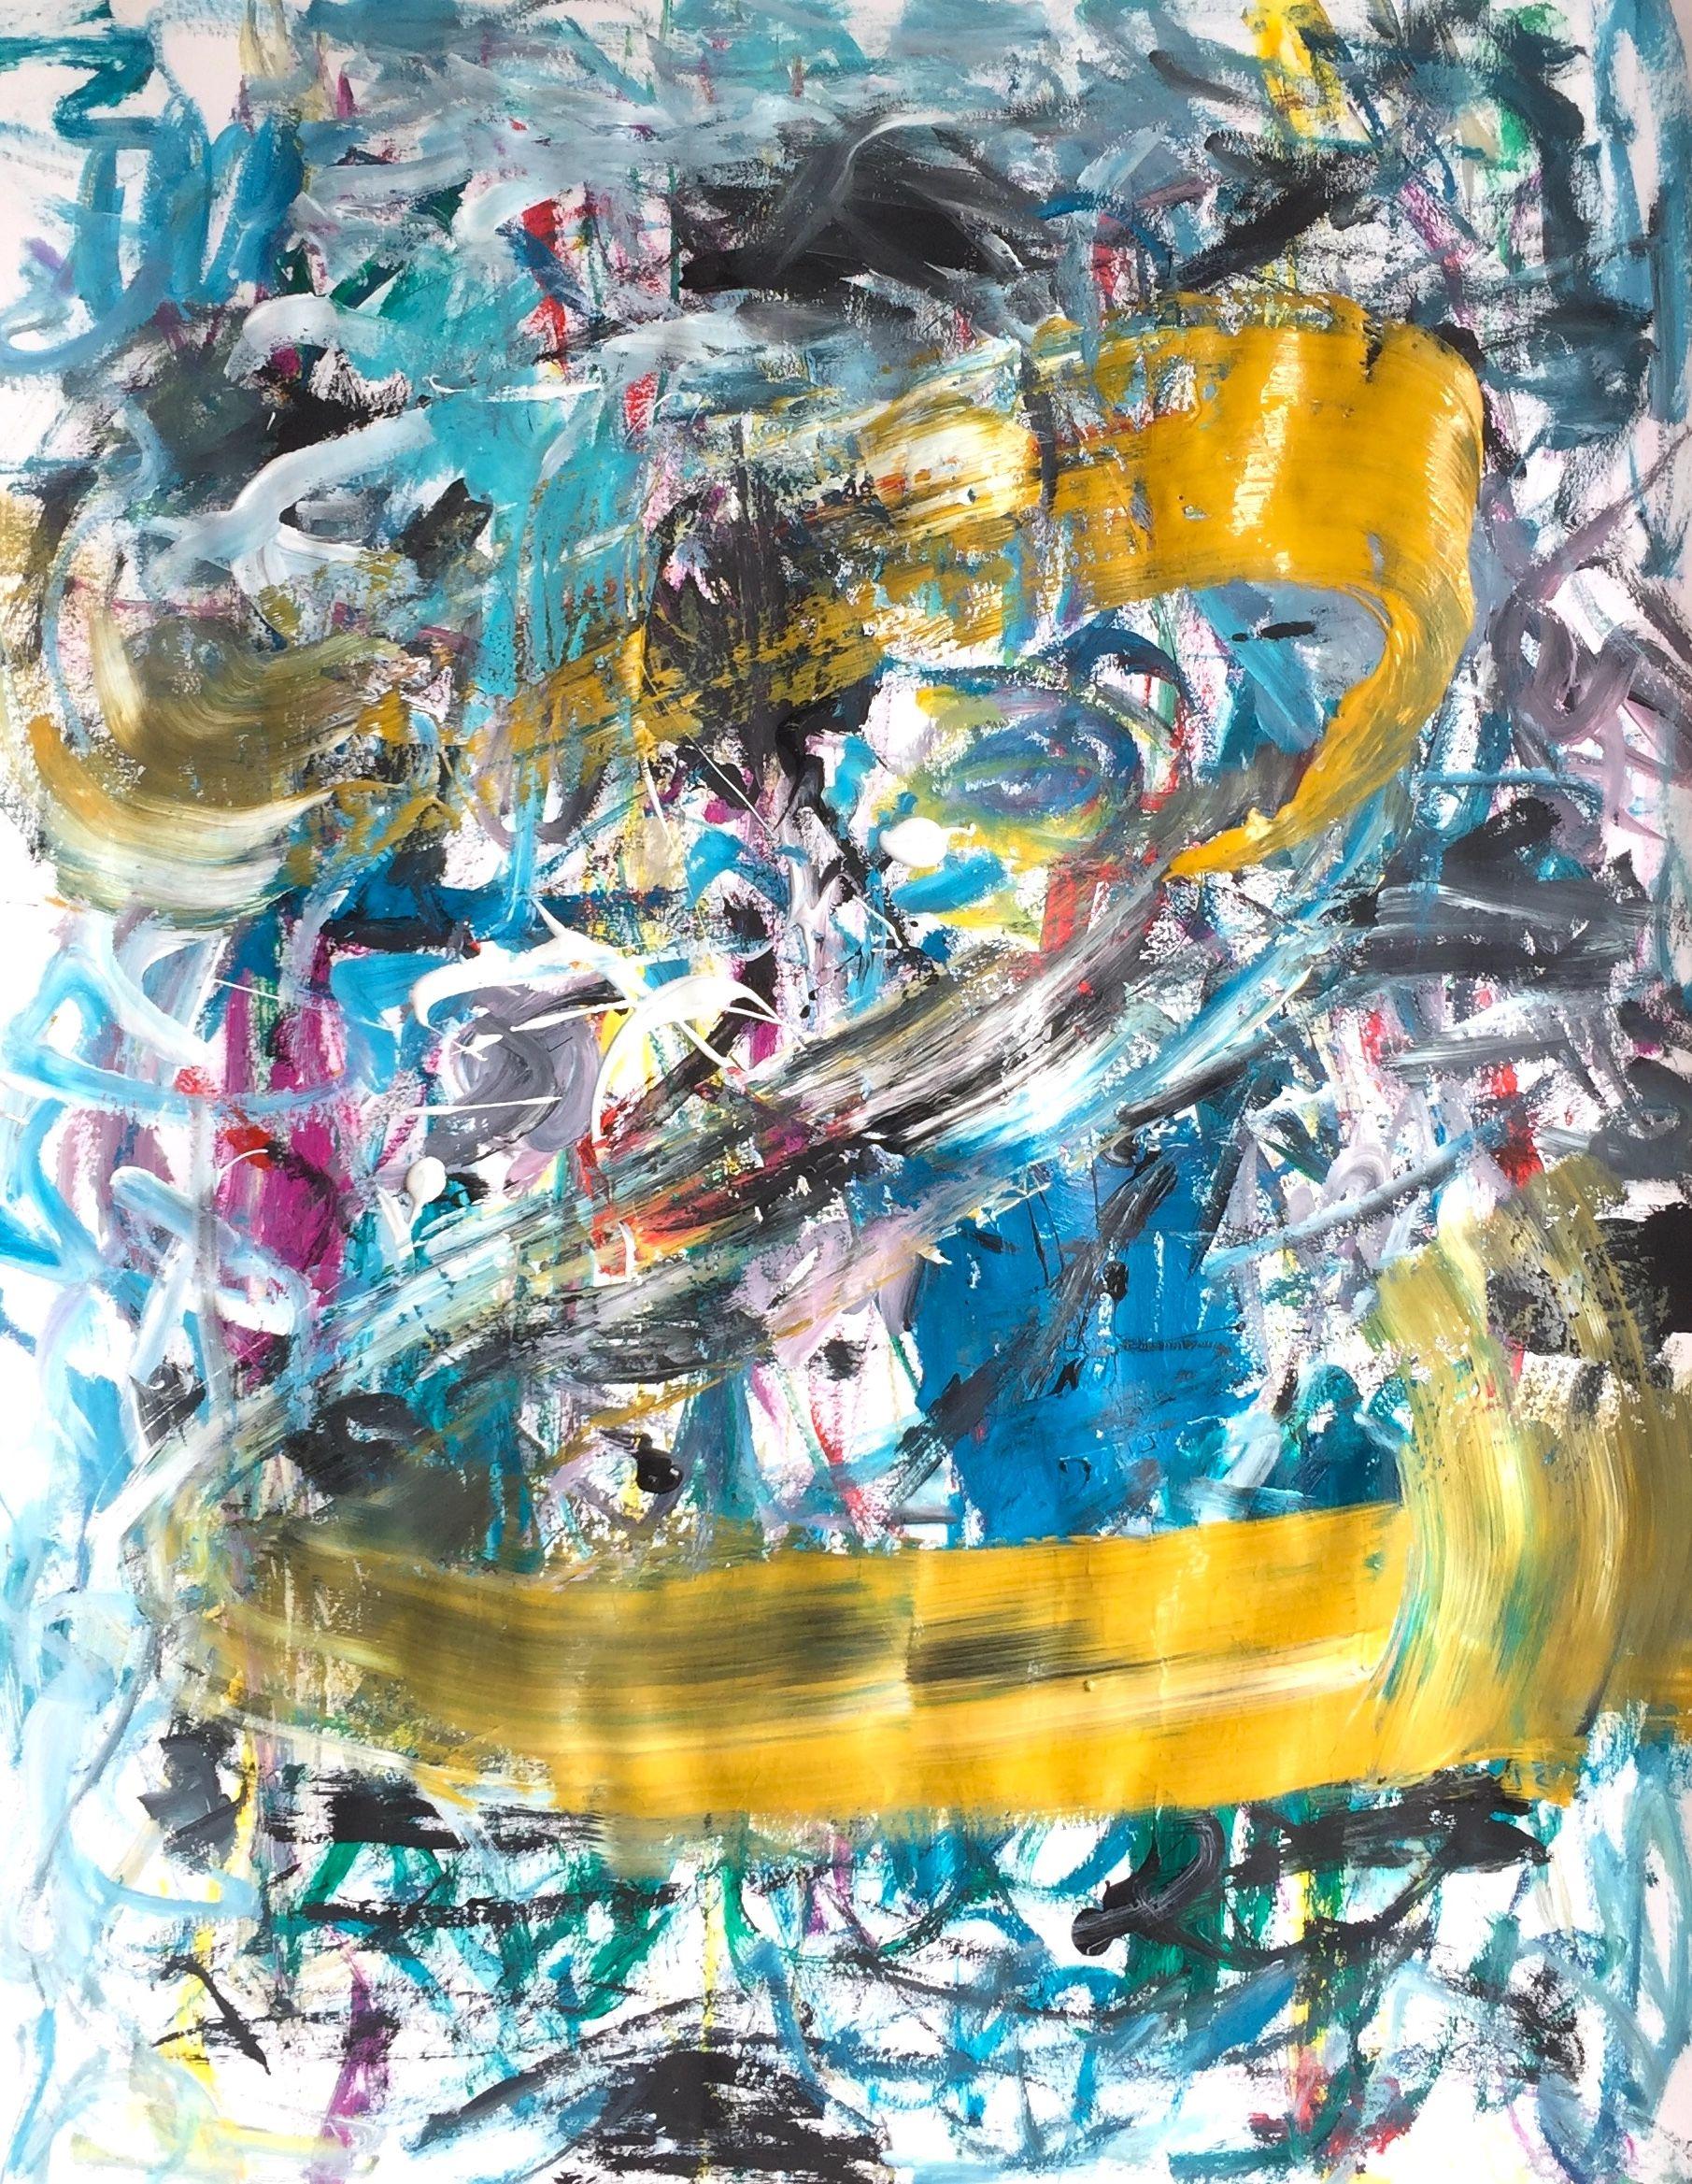 "Zero" is an abstract acrylic painting on paper. It is lively, colorful, expressive and in the colors yellow, turquoise, blue, black and white. It can be assigned to street art.  The artist describes "Zero" as an intermediate zone, a transition in